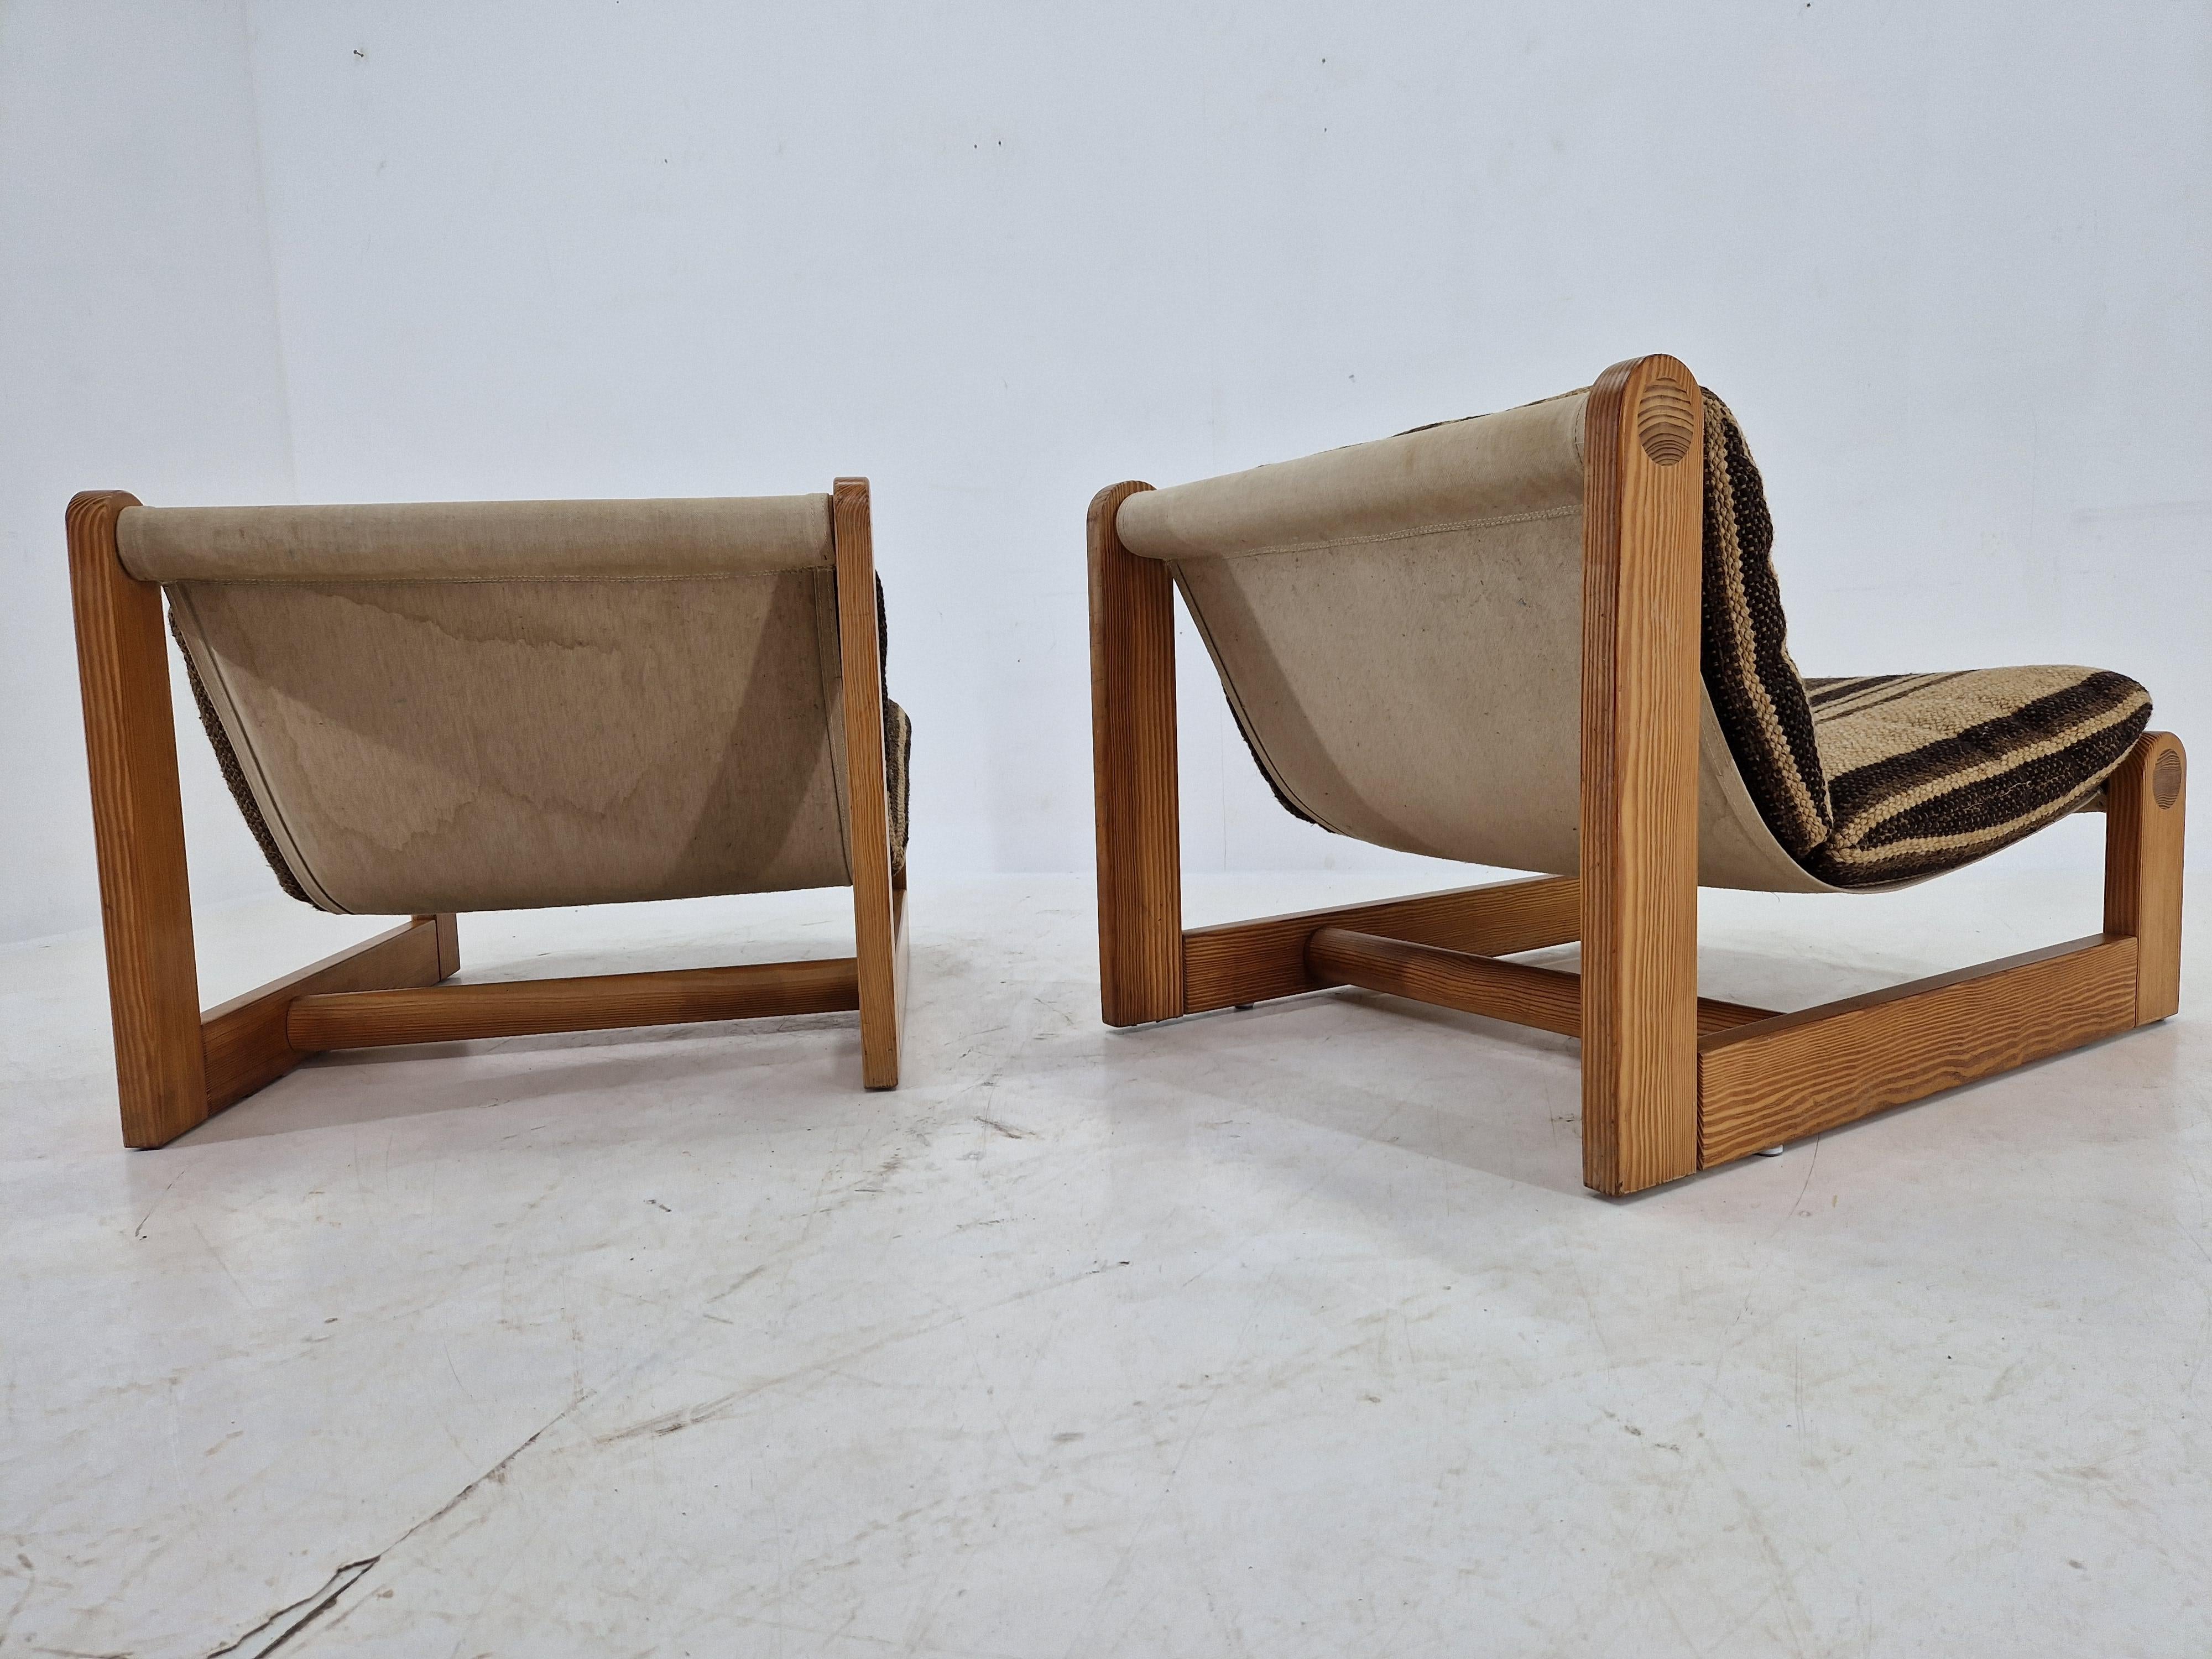 Pair of Midcentury Rare Lounge Chairs Pine Wood, Denmark, 1960s For Sale 5